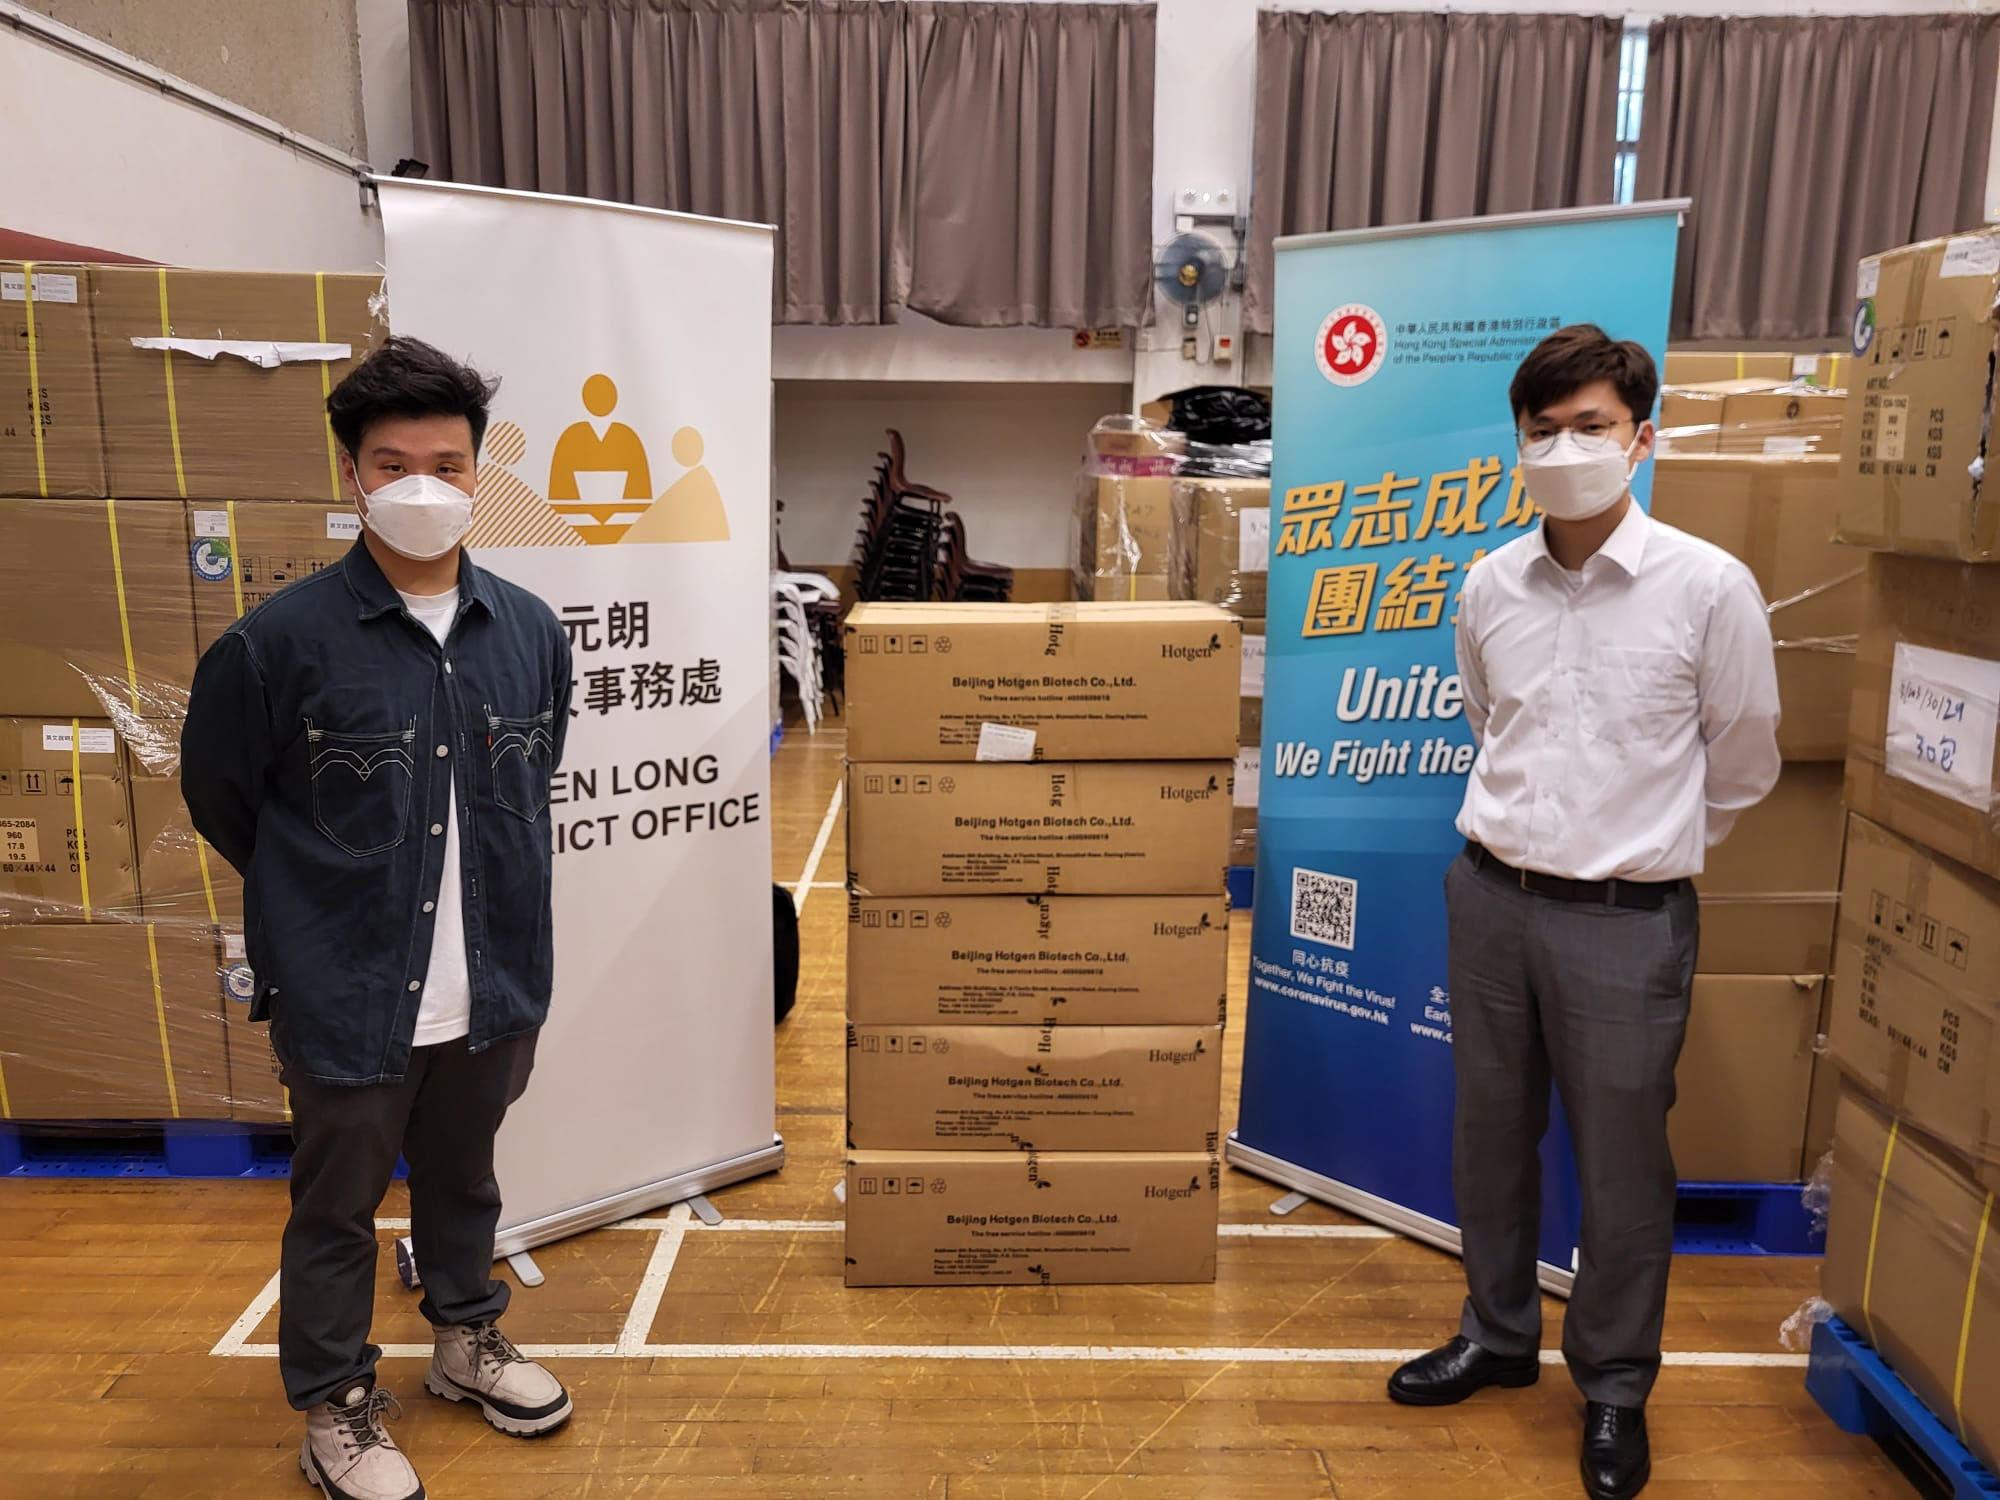 The Yuen Long District Office today (April 23) distributed COVID-19 rapid test kits to households, cleansing workers and property management staff living and working in residential premises around Castle Peak Road Hung Shui Kiu for voluntary testing through the property management companies.